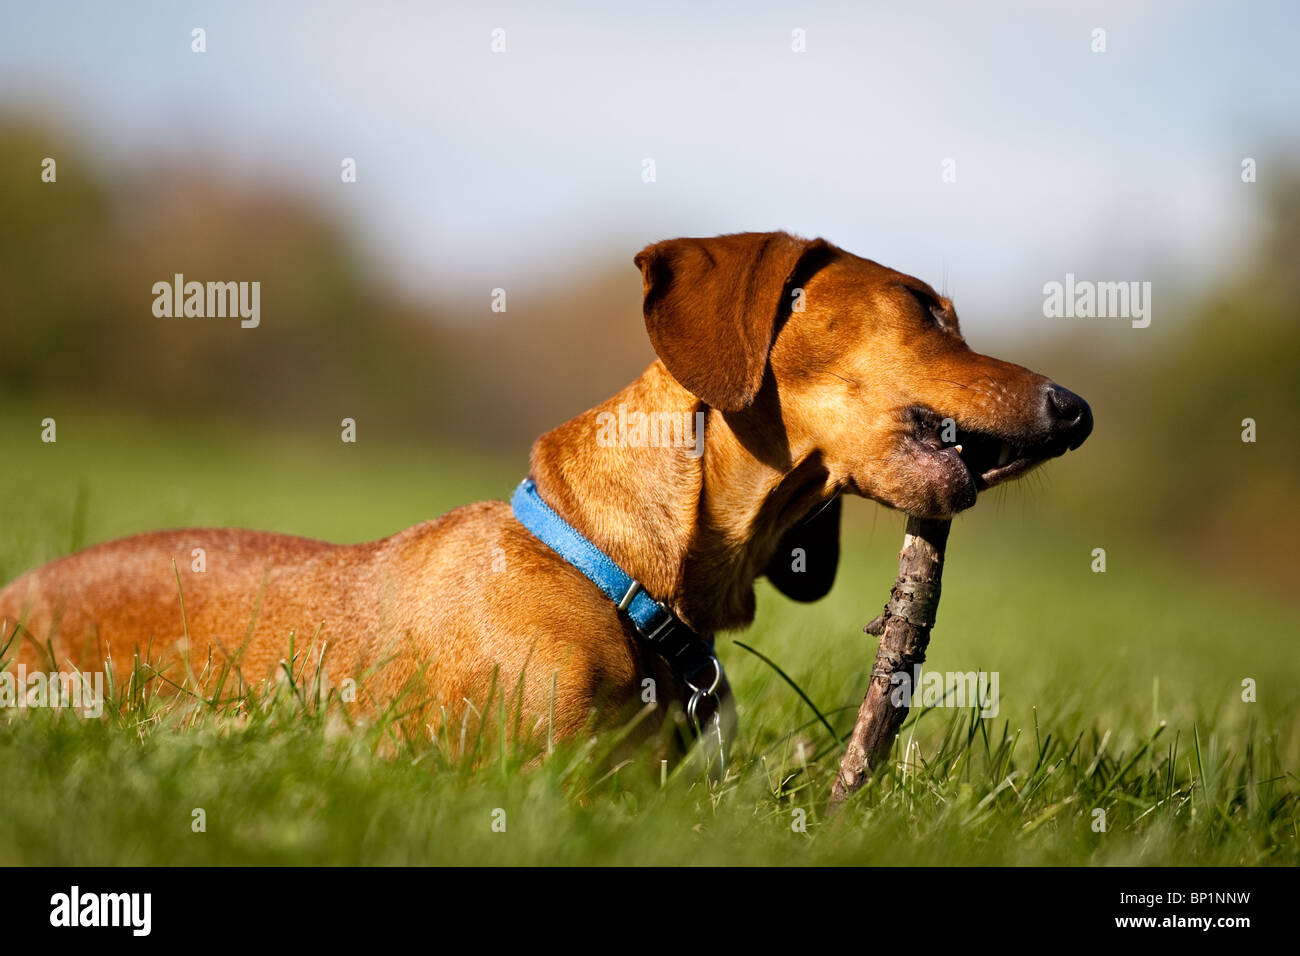 A miniature Dachshund lying in the grass, chewing on a stick. Stock Photo